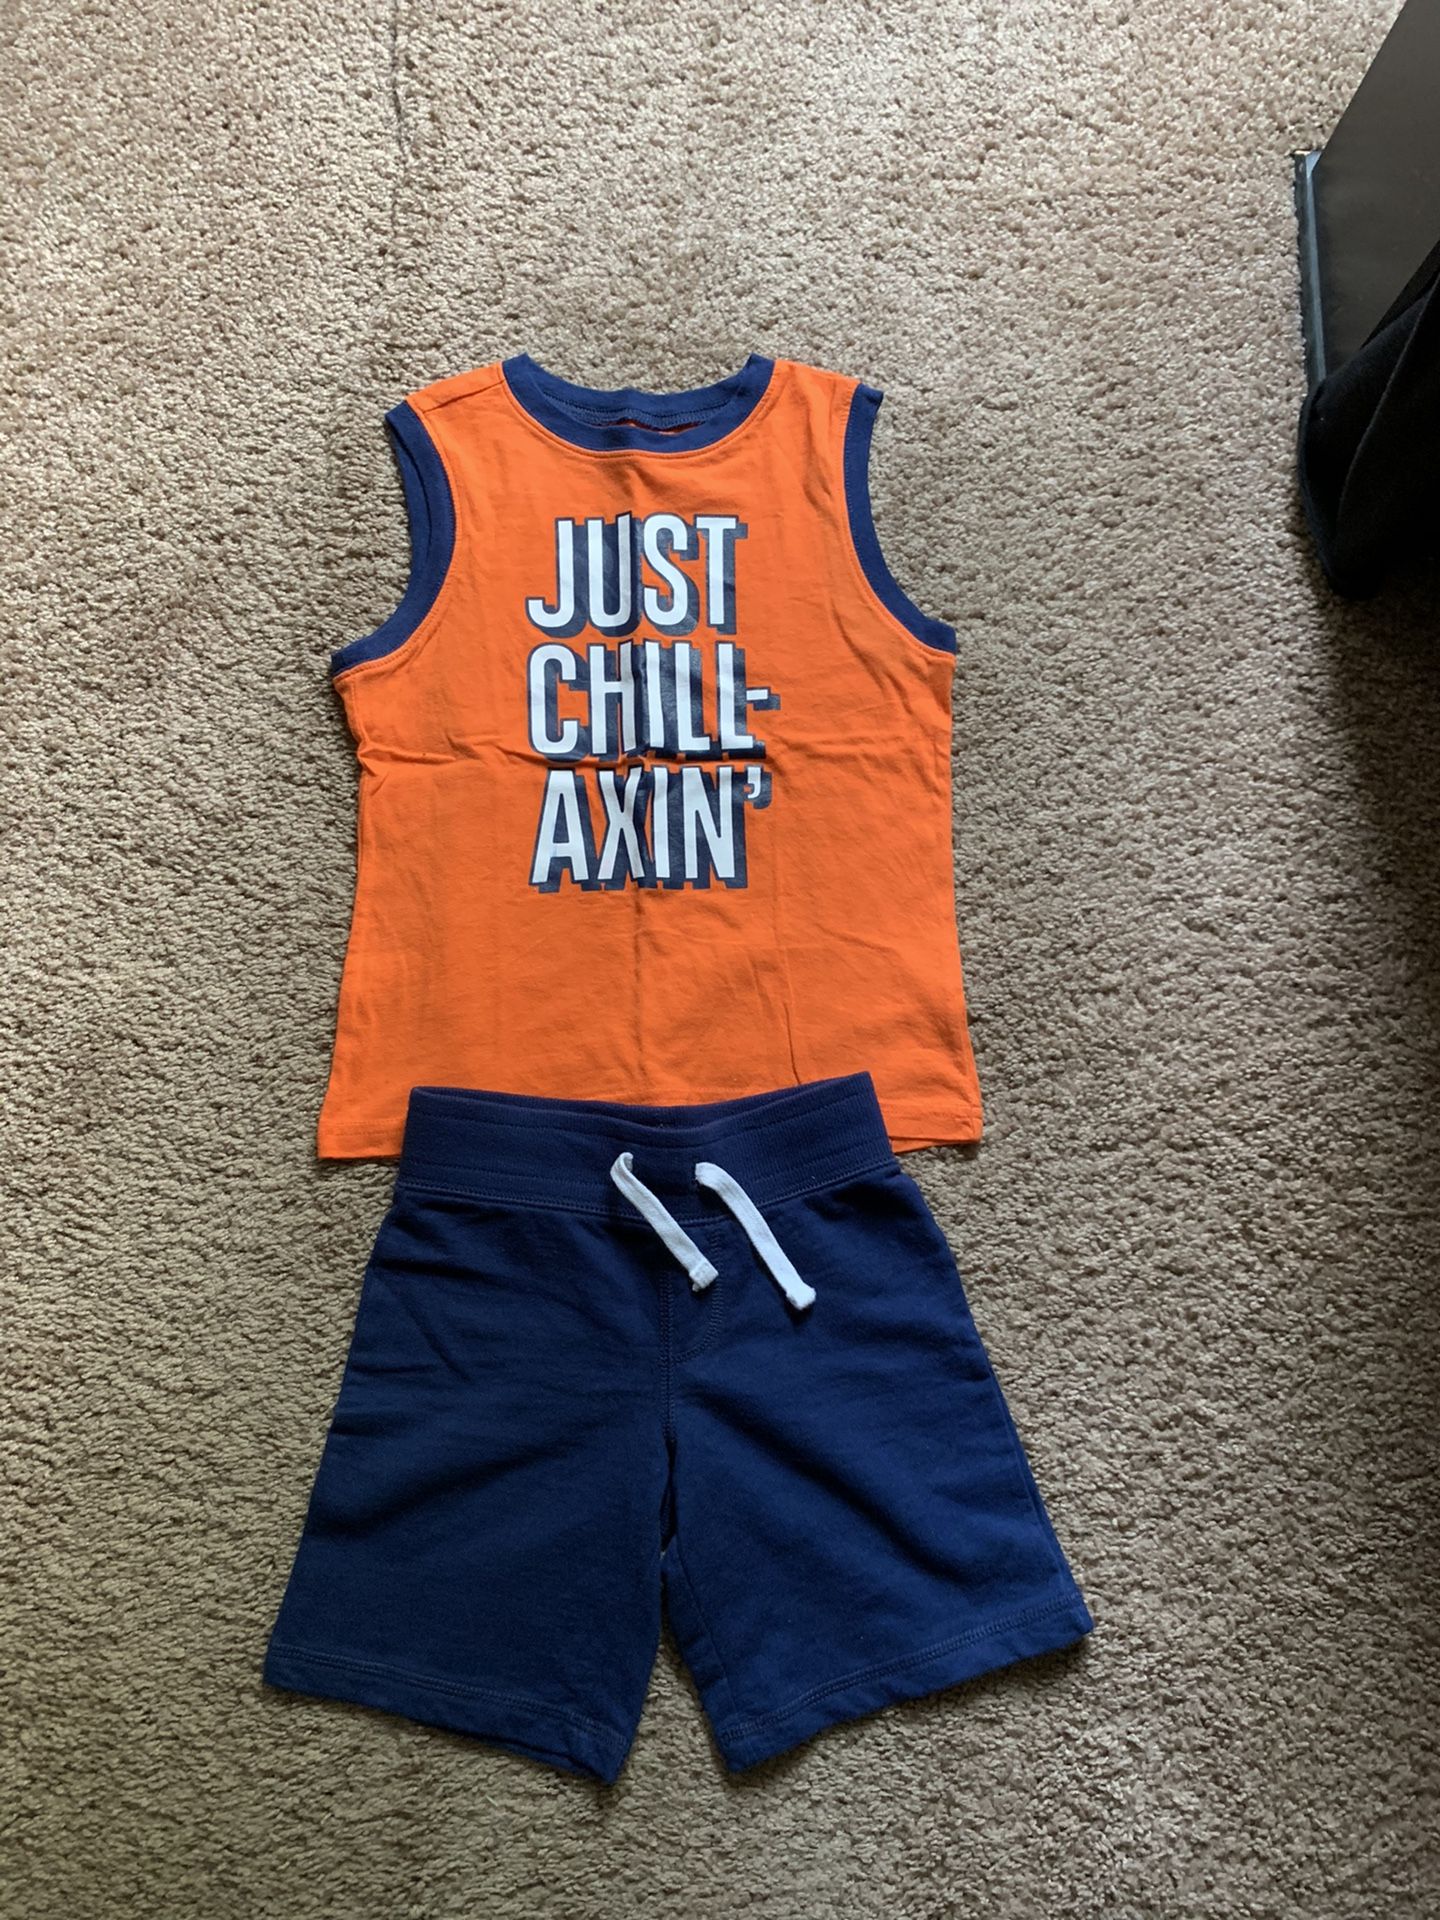 Size 5t toddlers outfits